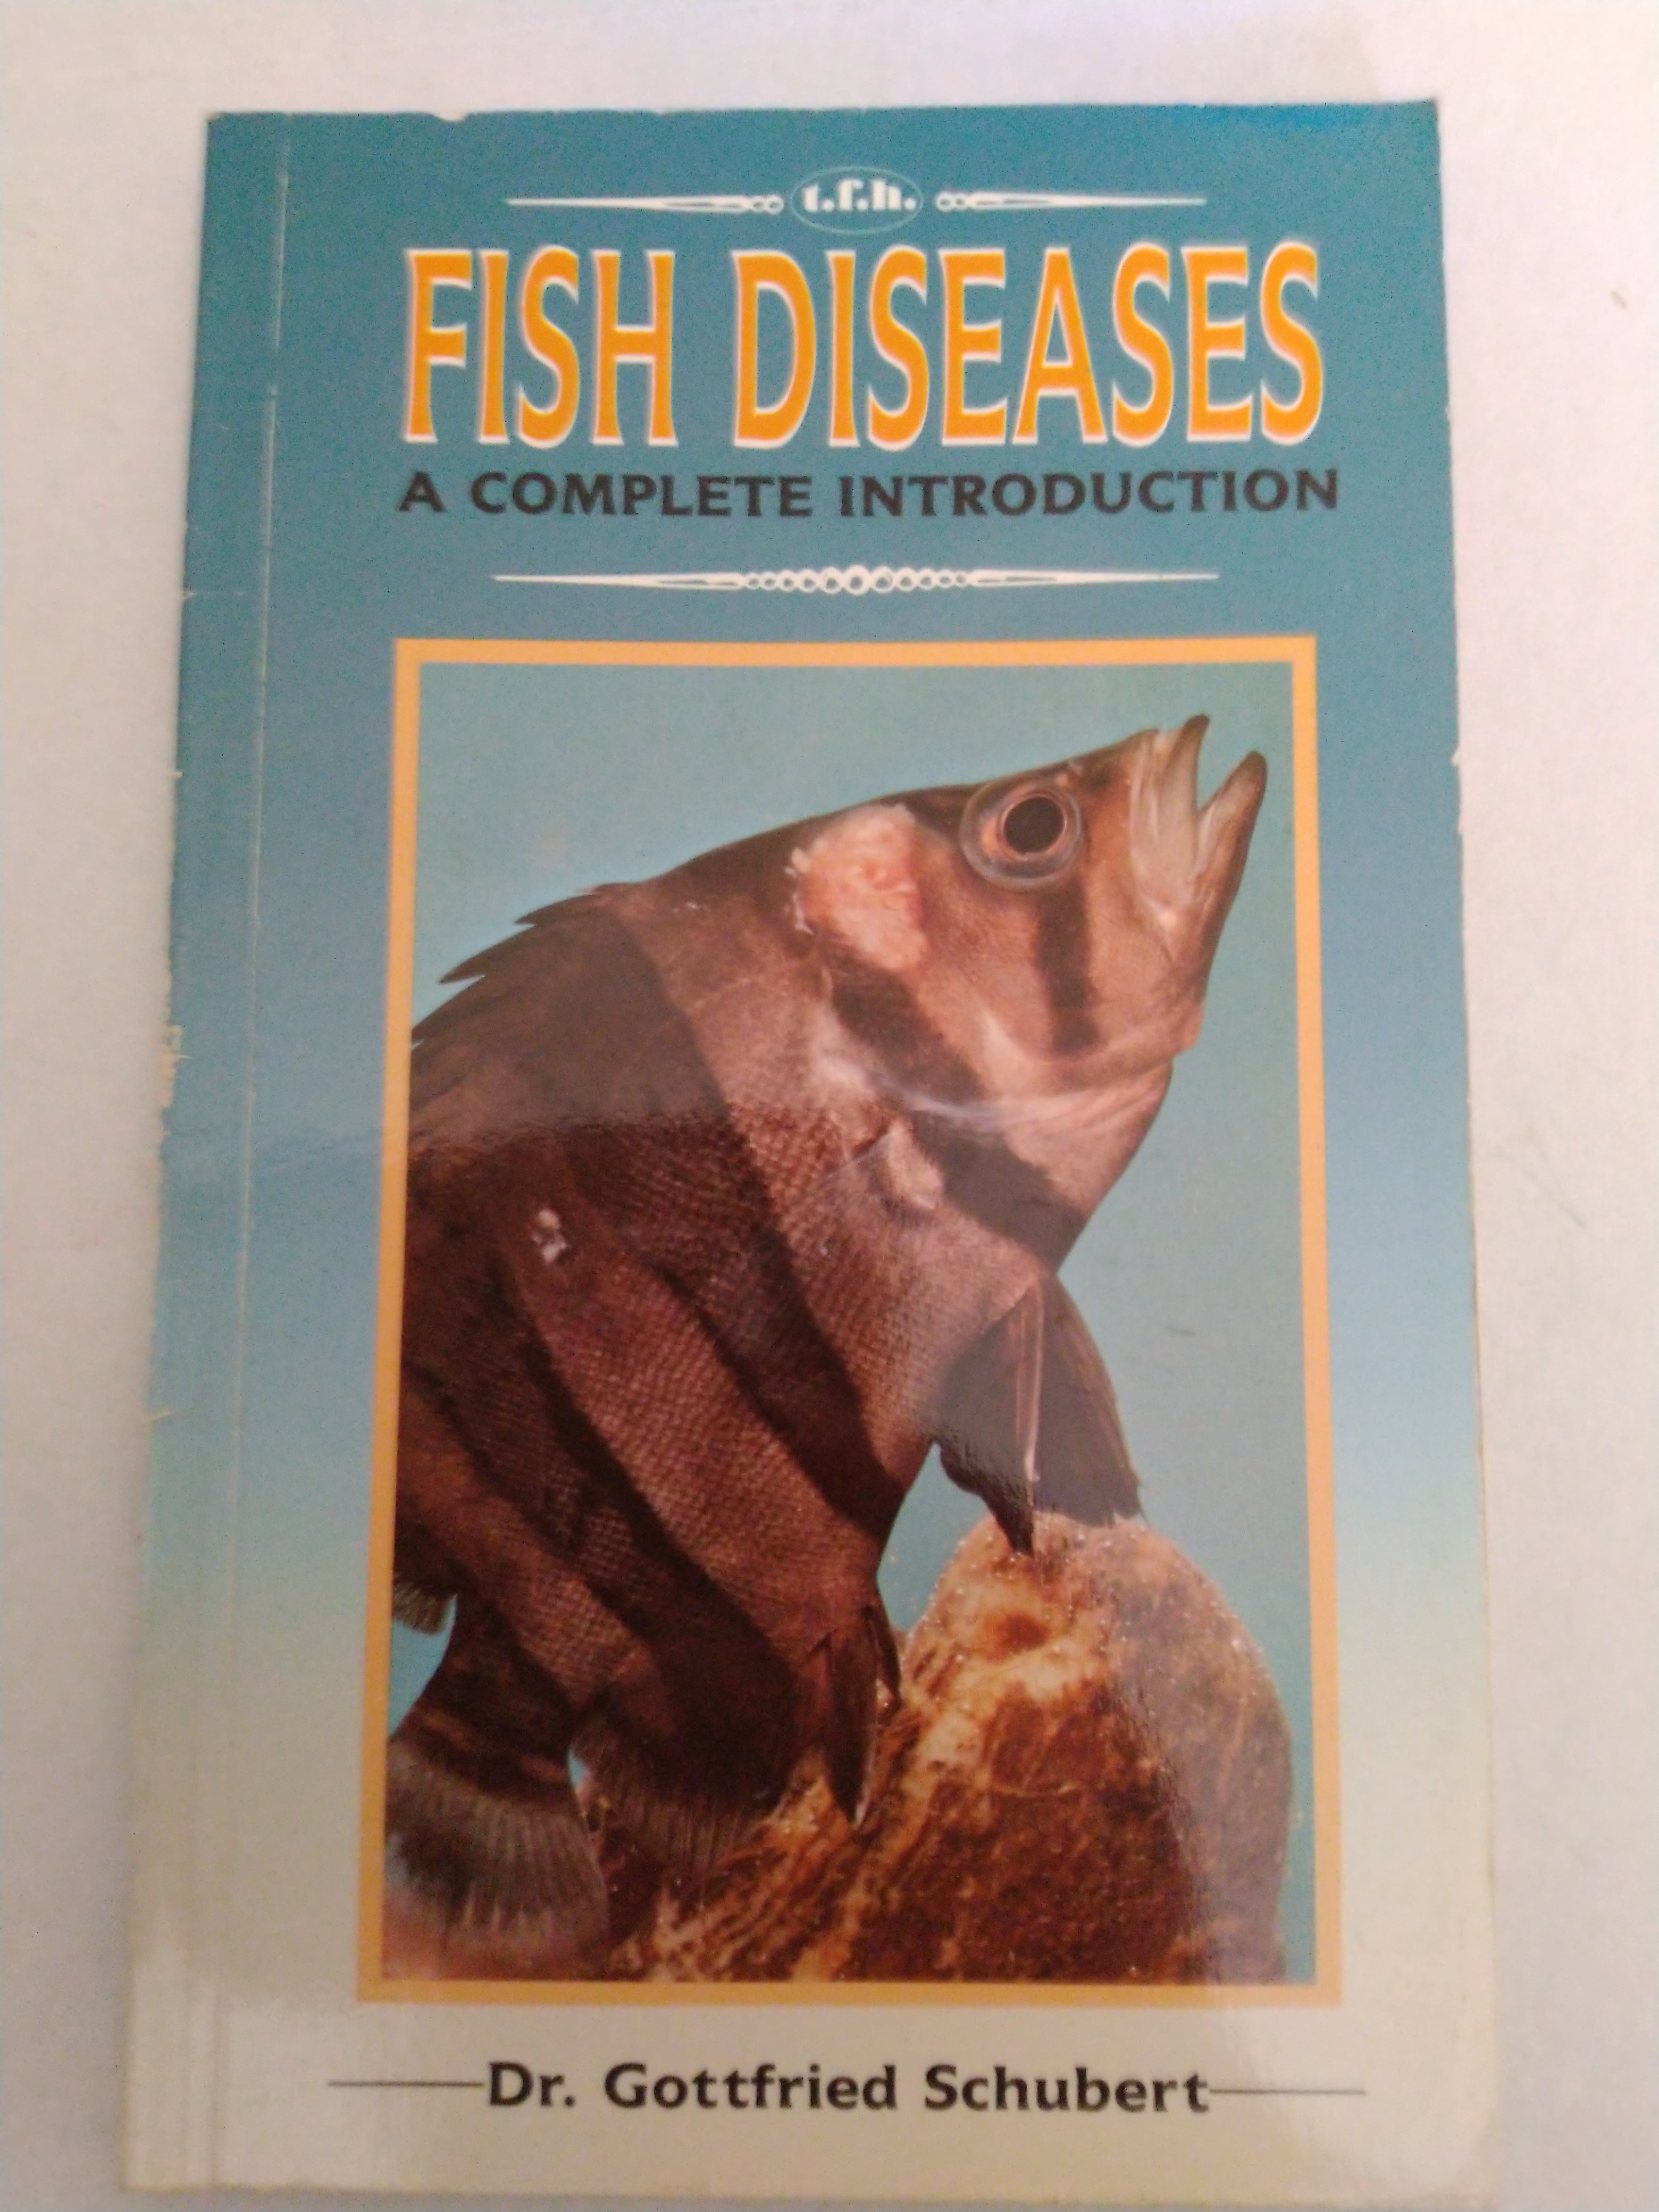 Fish Diseases A Complete Introduction by Gottfried Schubert